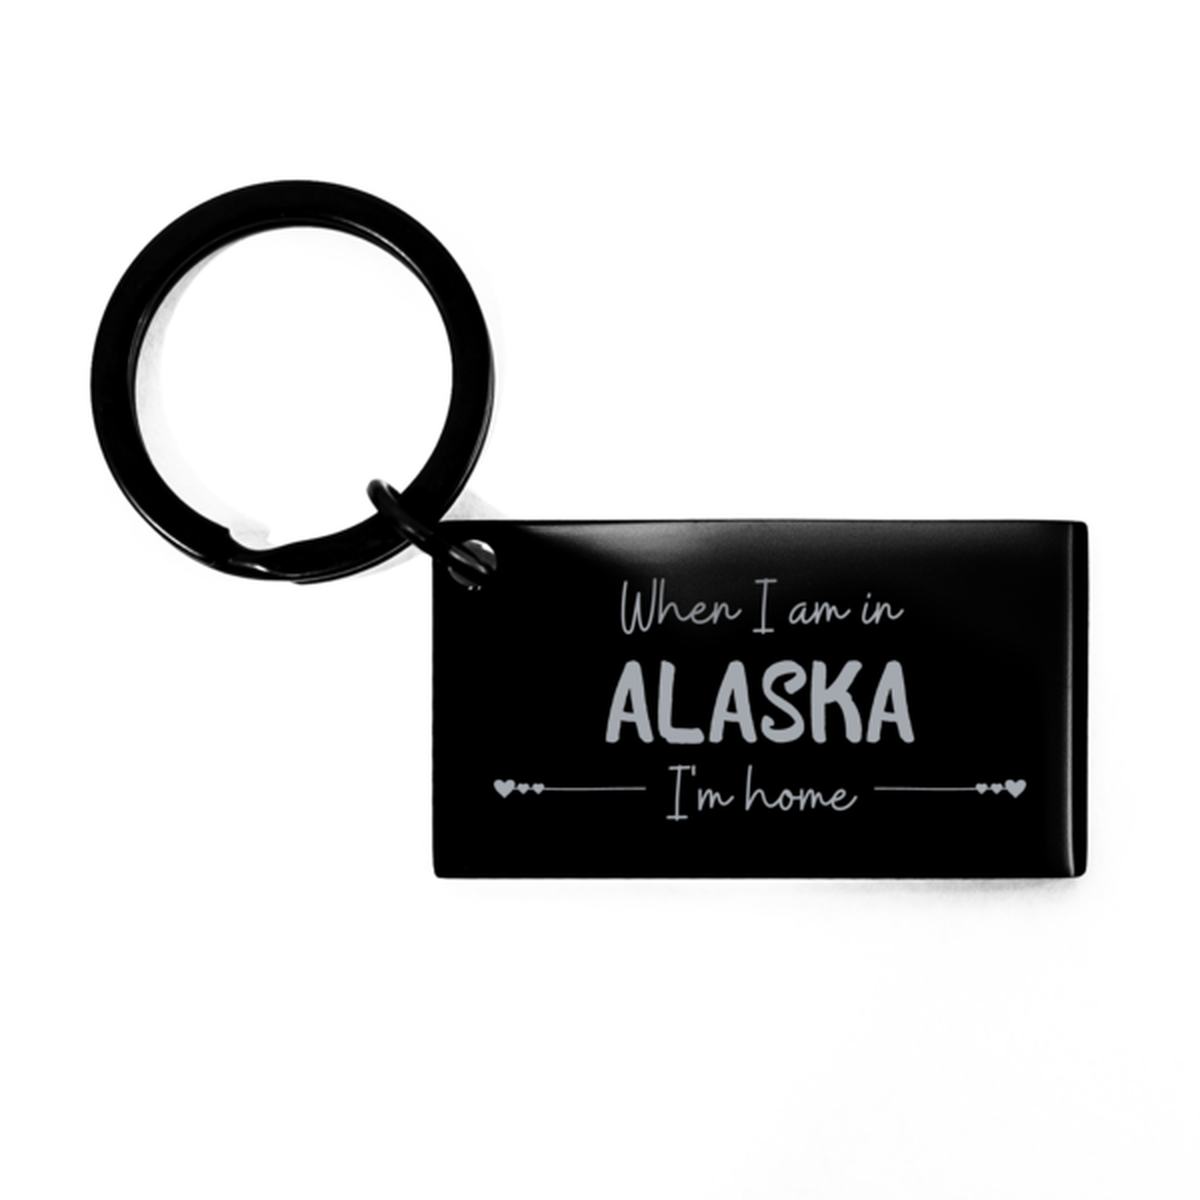 When I am in Alaska I'm home Keychain, Cheap Gifts For Alaska, State Alaska Birthday Gifts for Friends Coworker